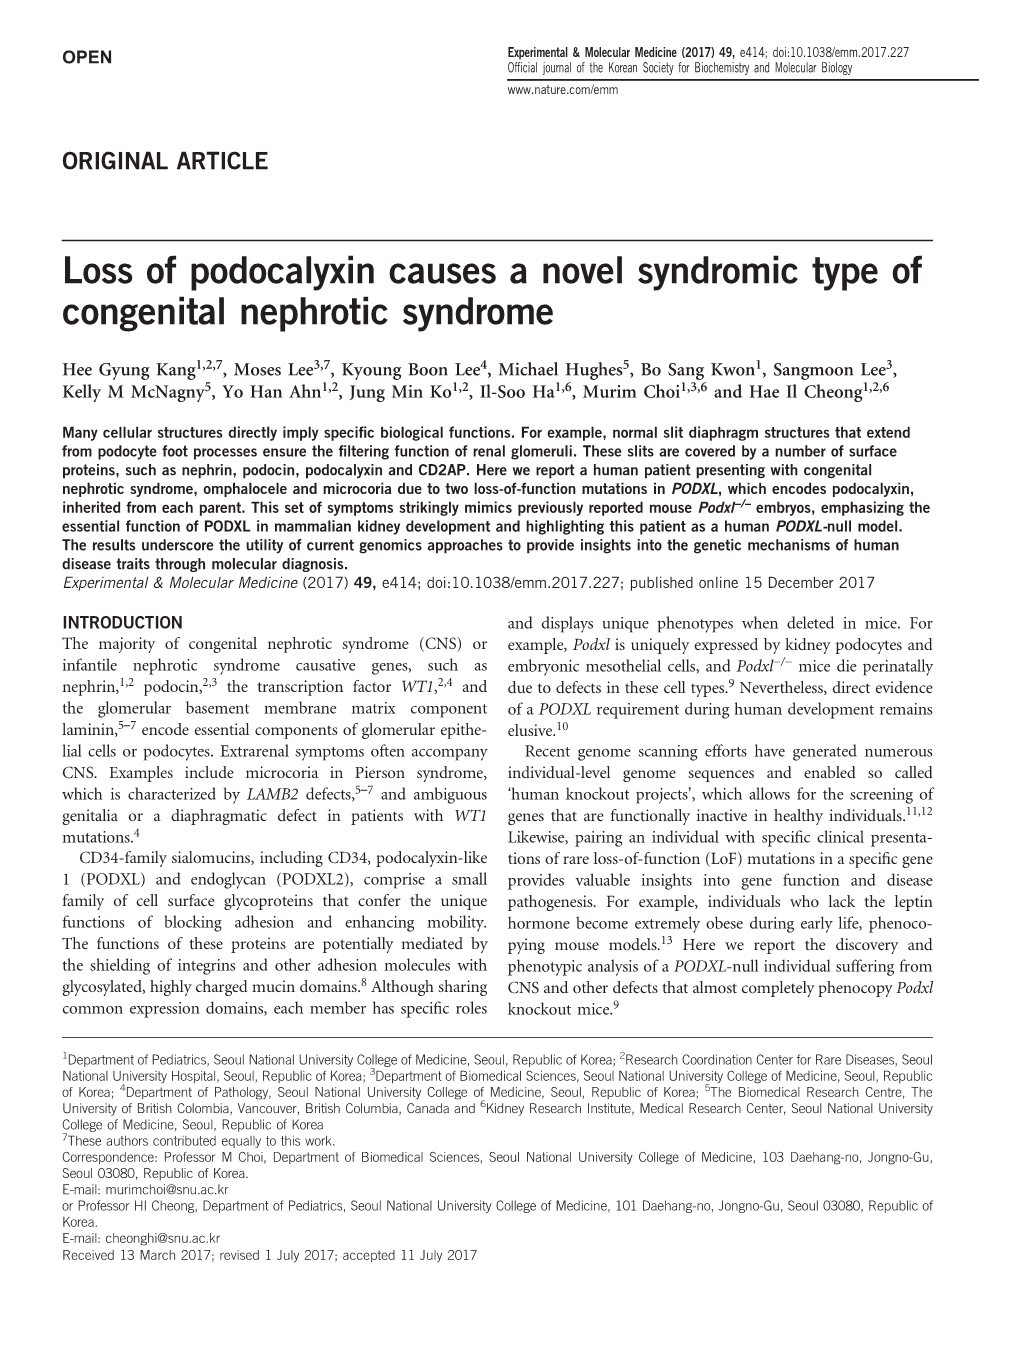 Loss of Podocalyxin Causes a Novel Syndromic Type of Congenital Nephrotic Syndrome